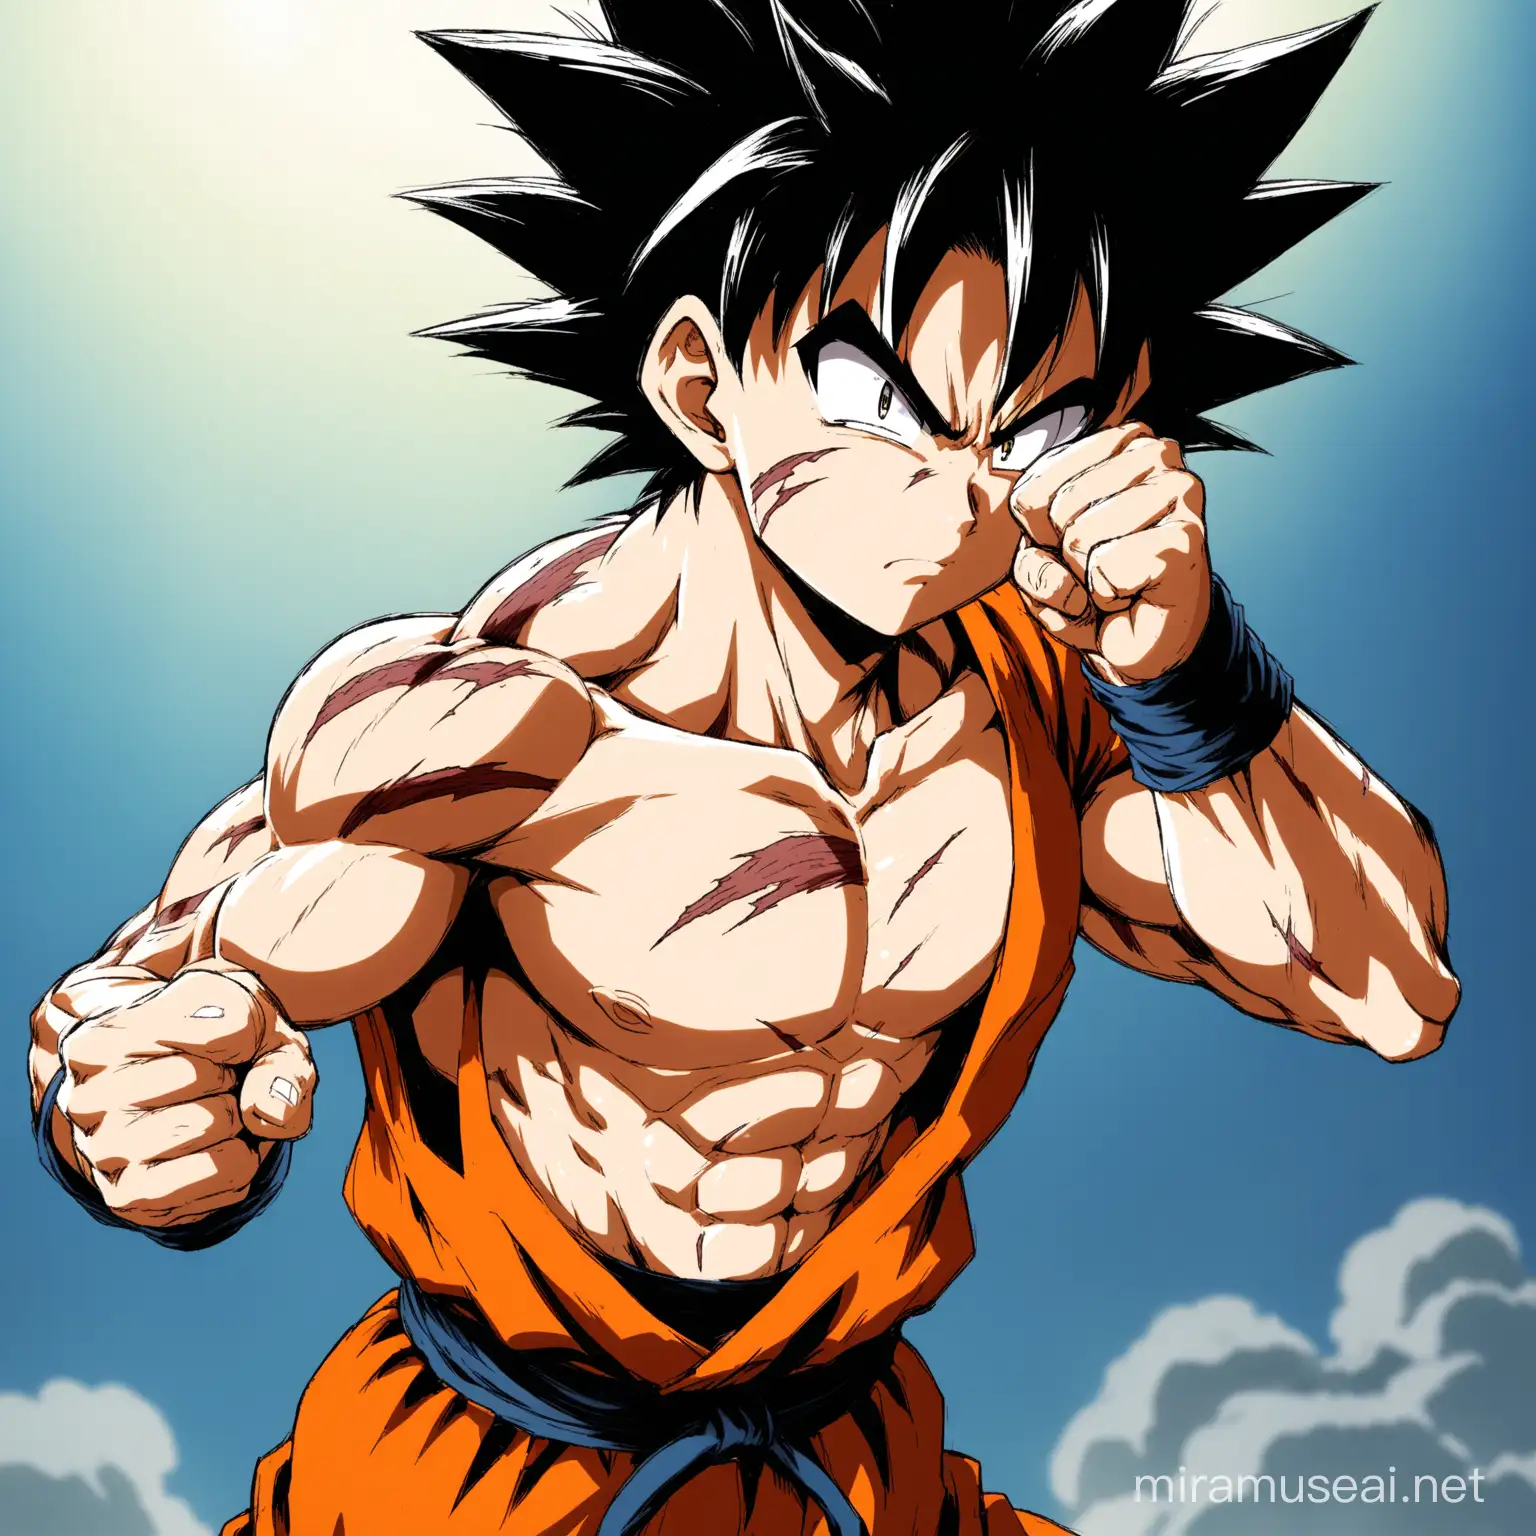 Dbz character goku tired with not pupils in his eyes and his one hand raising high with fist closed but rest of the body filled with scars and loose